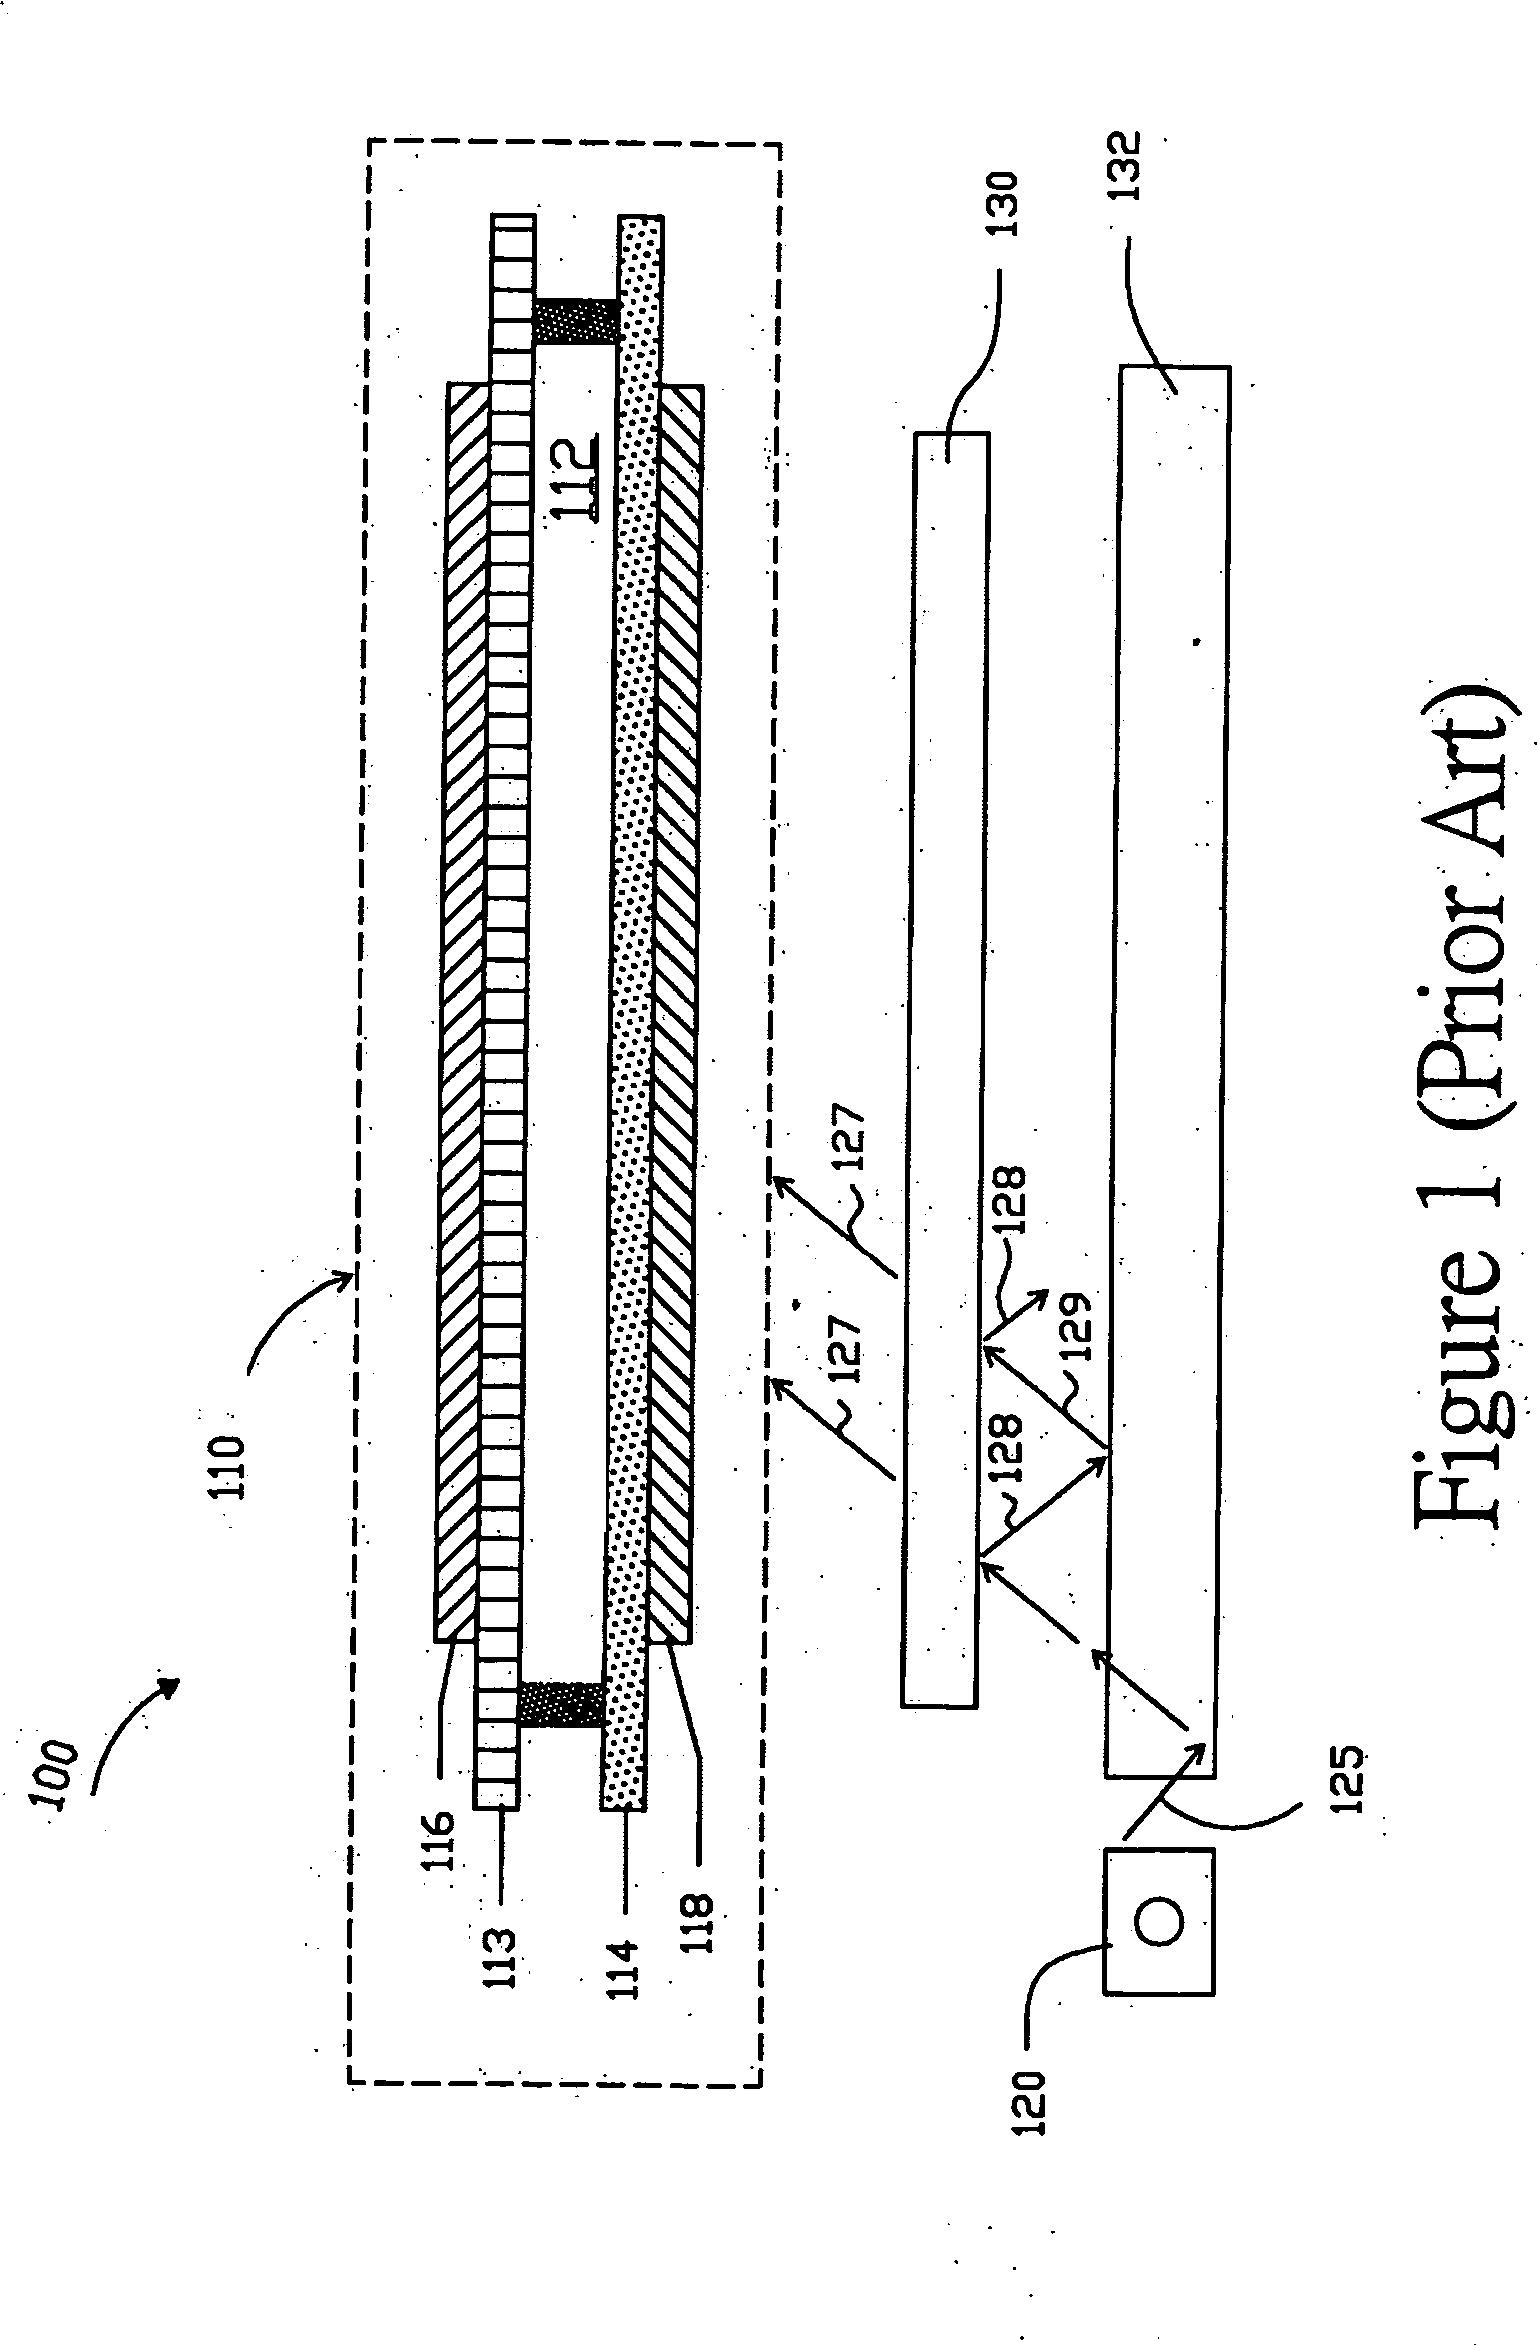 Optical converter module for display system